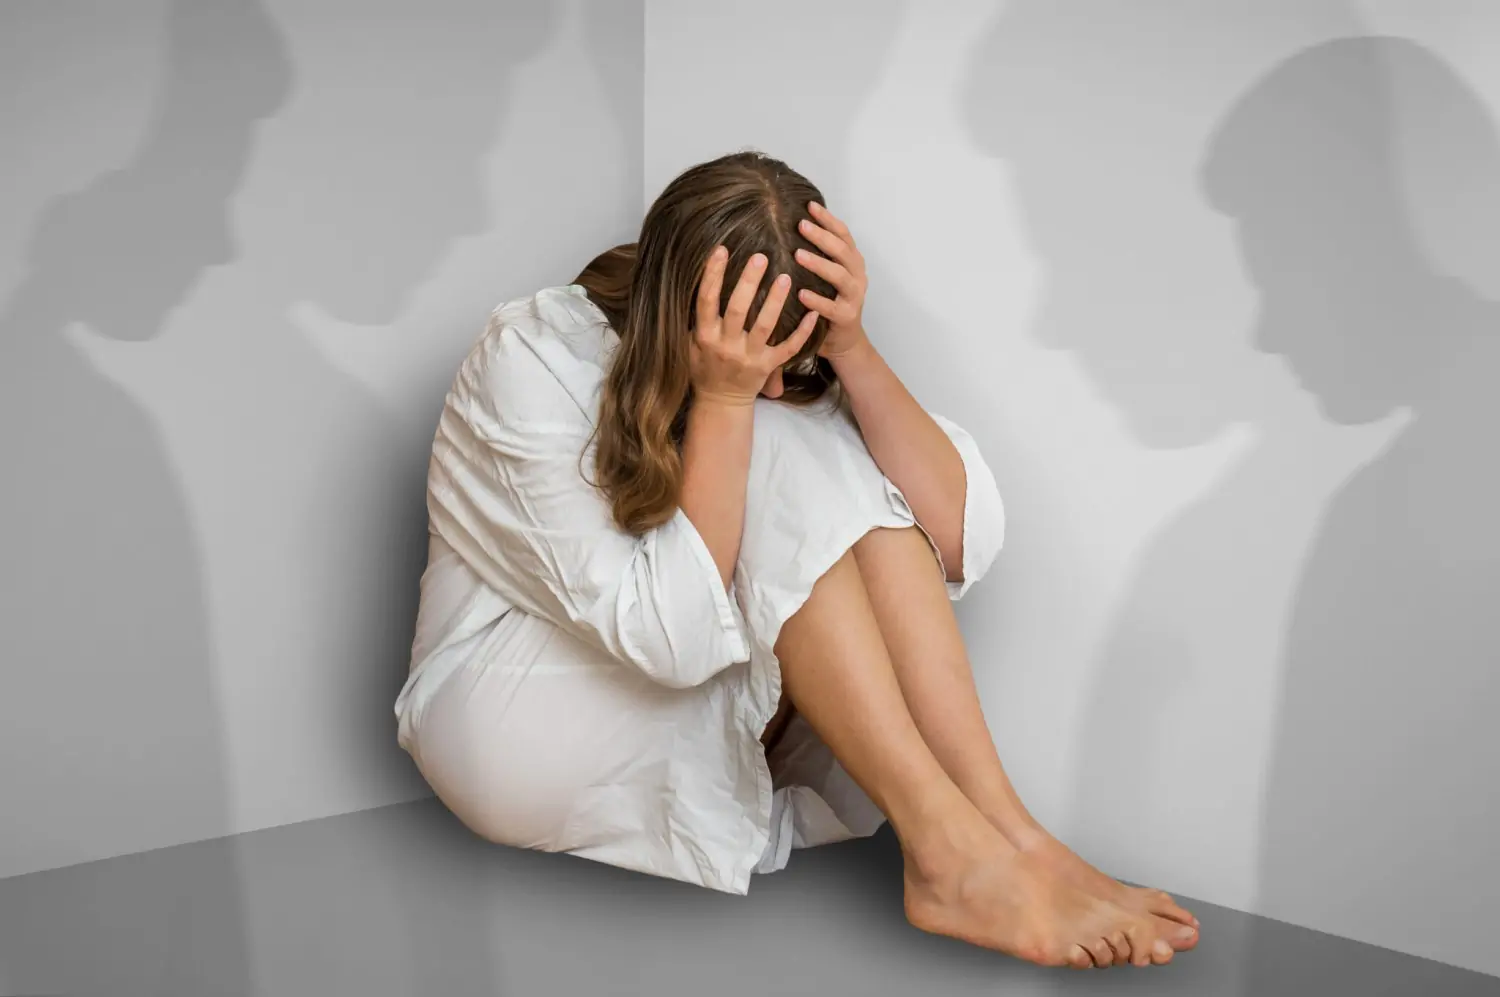 Symptoms and Diagnosis of Post-Traumatic Stress Disorder